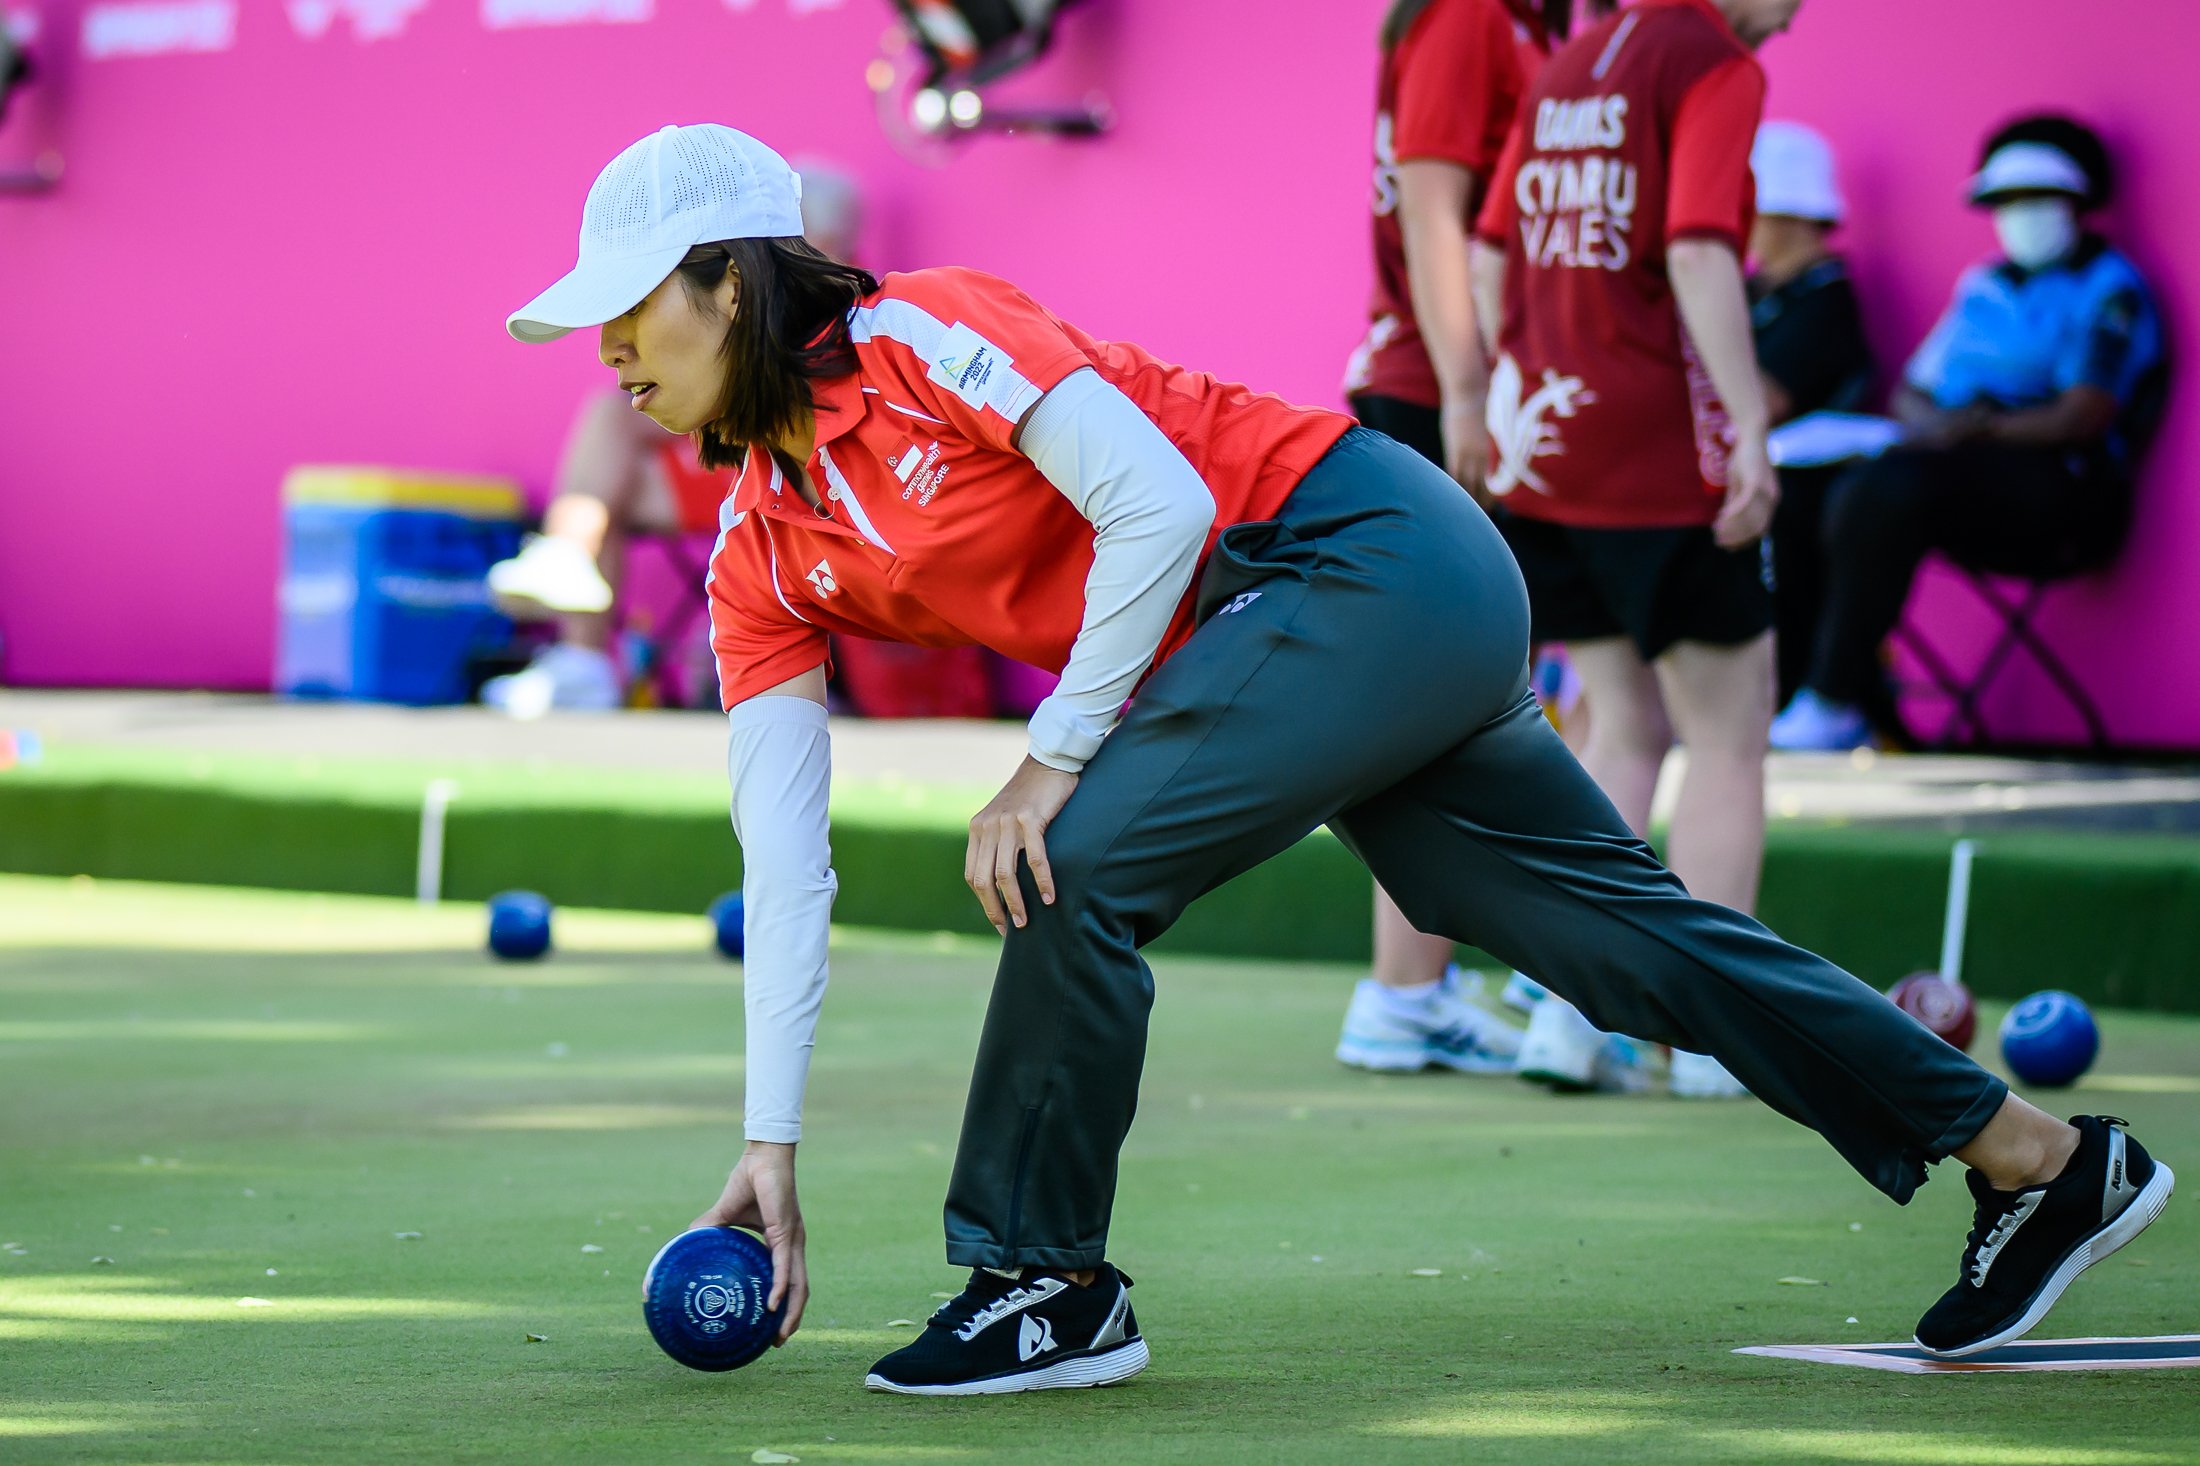 20220803_-_Lawn Bowls Photo by Andy Chua_033